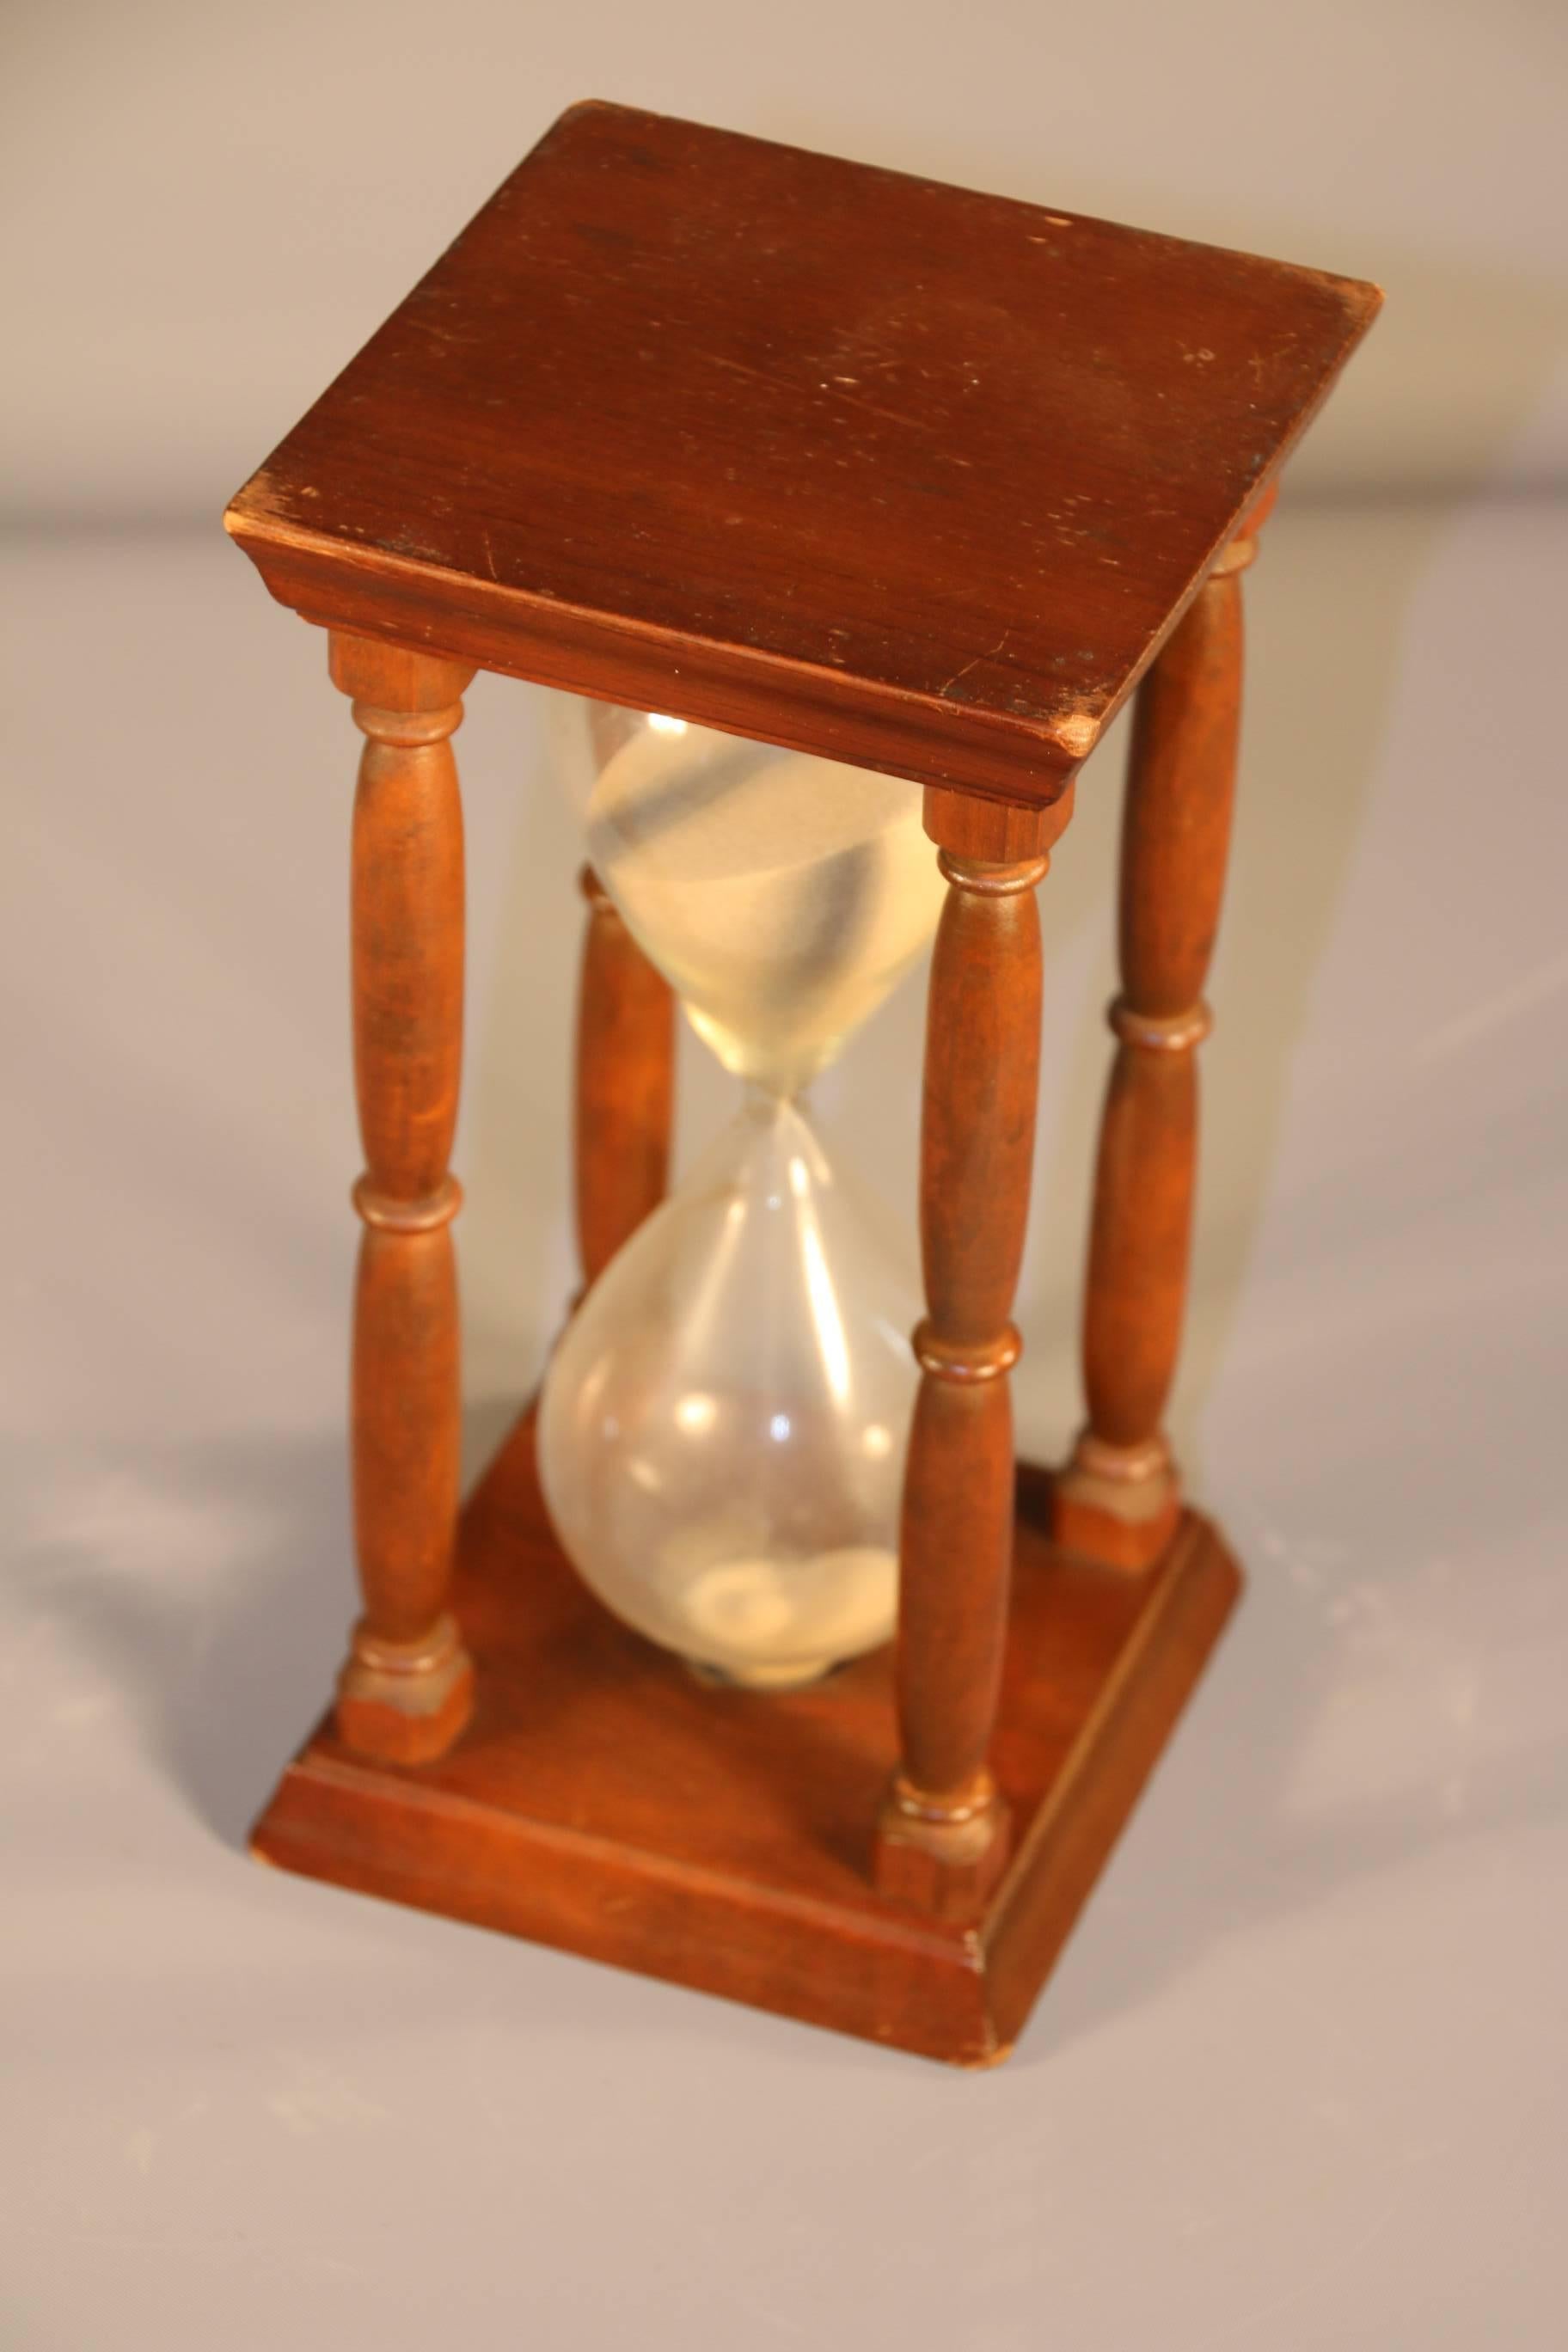 Late 19th Century Sand-Filled Hourglass For Sale 3